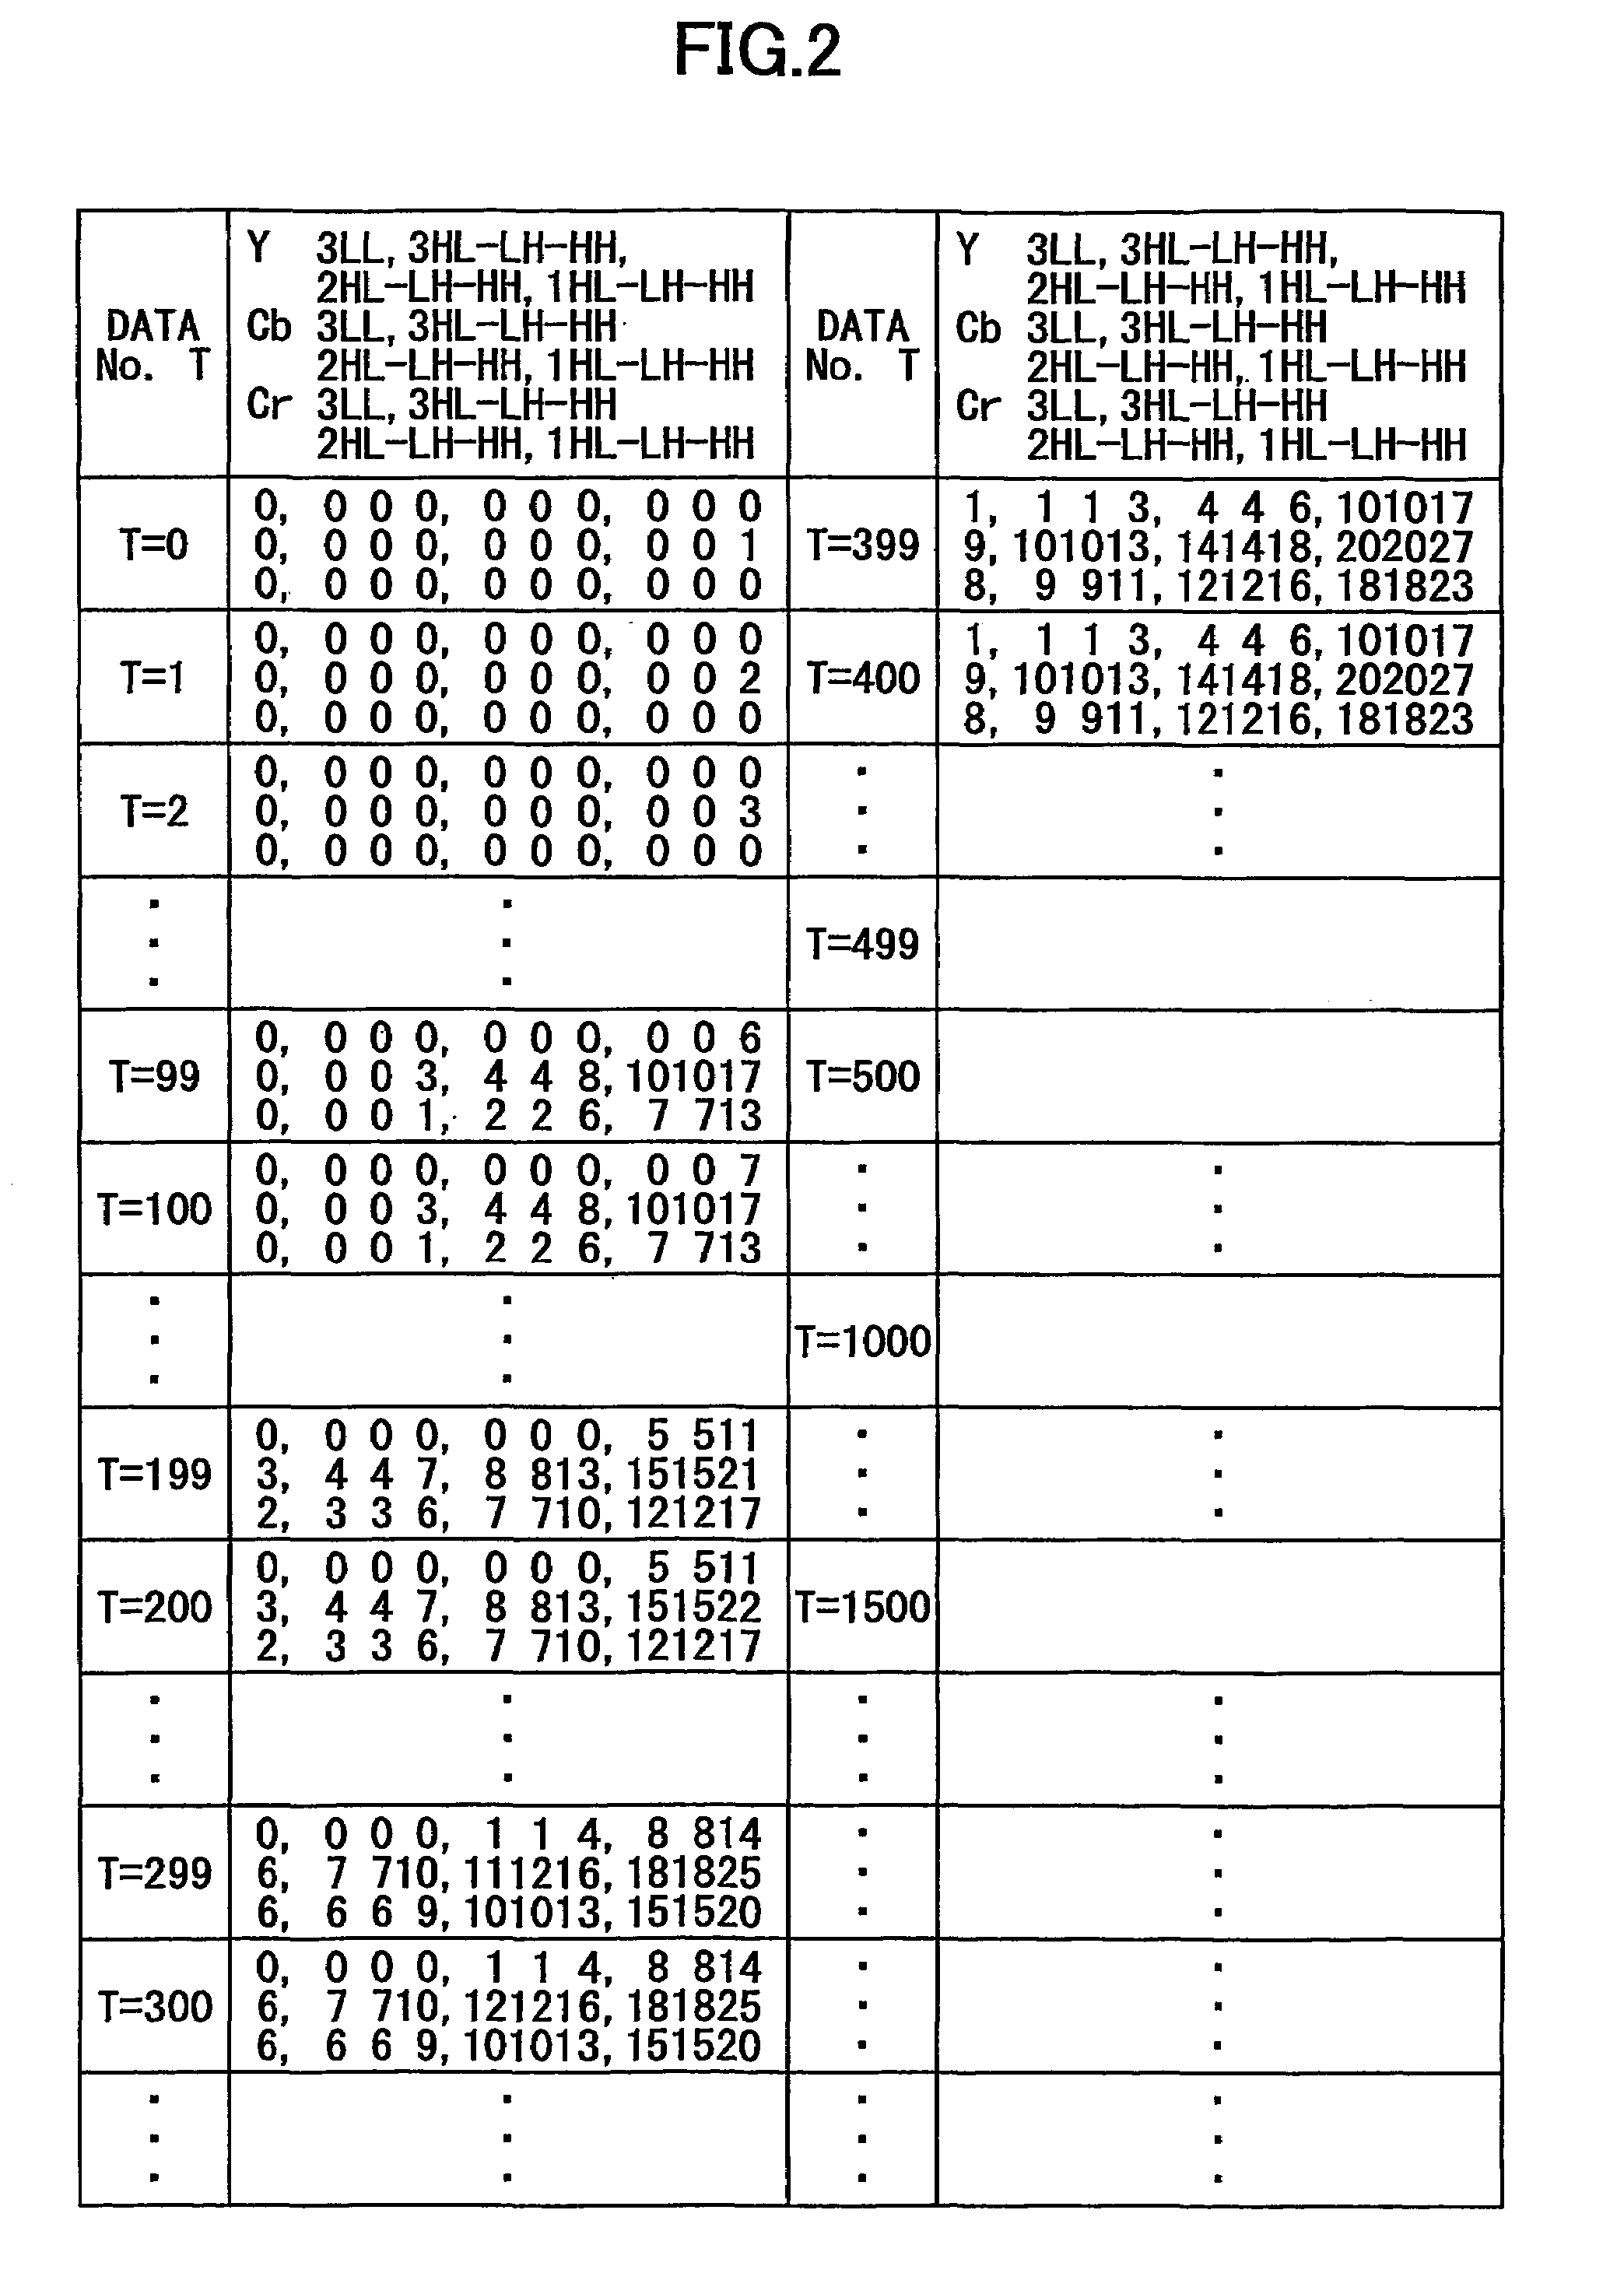 Image compressing apparatus that achieves desired code amount